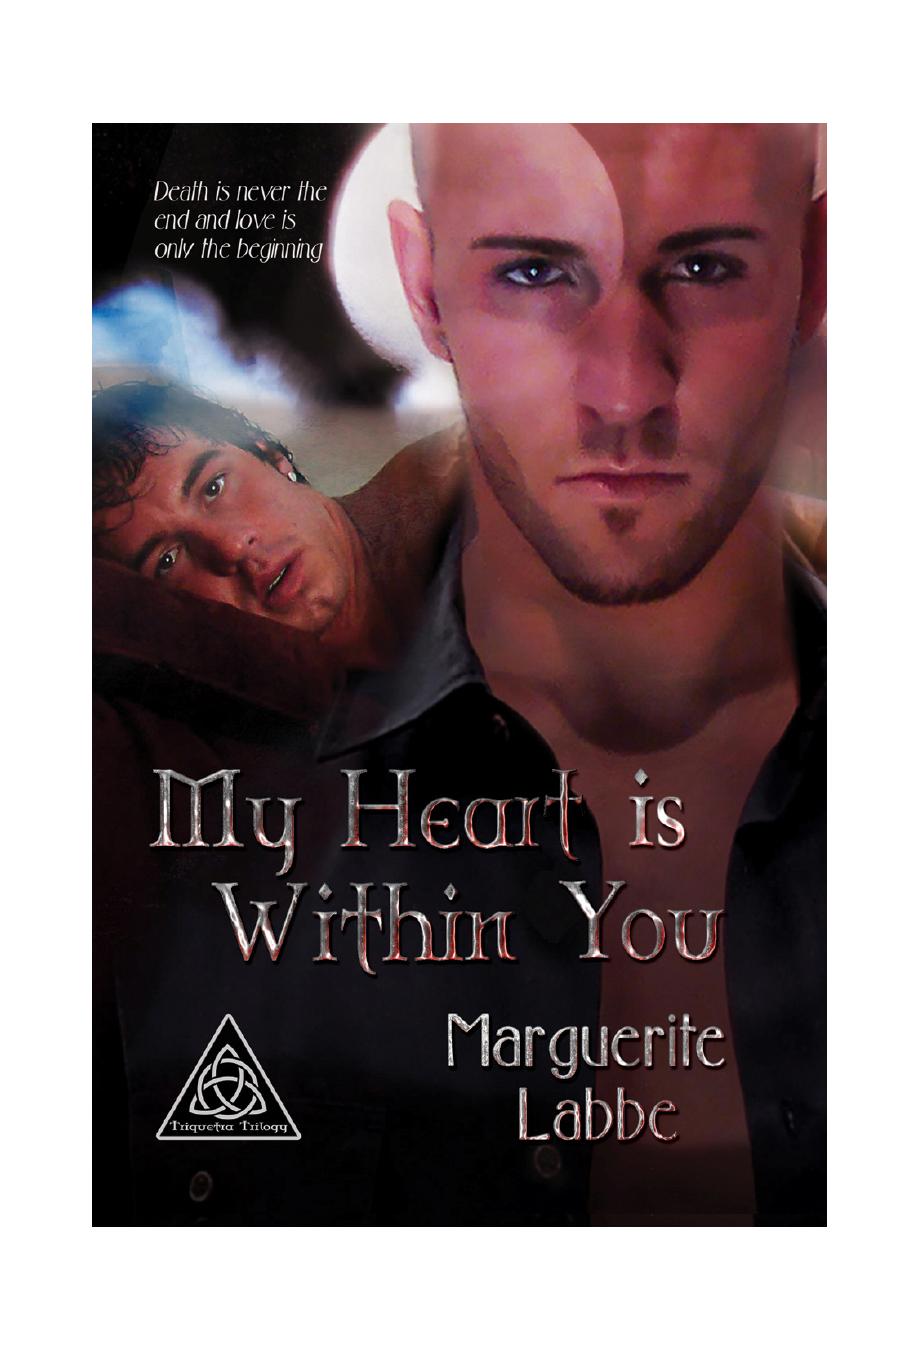 My Heart is Within You by Marguerite Labbe